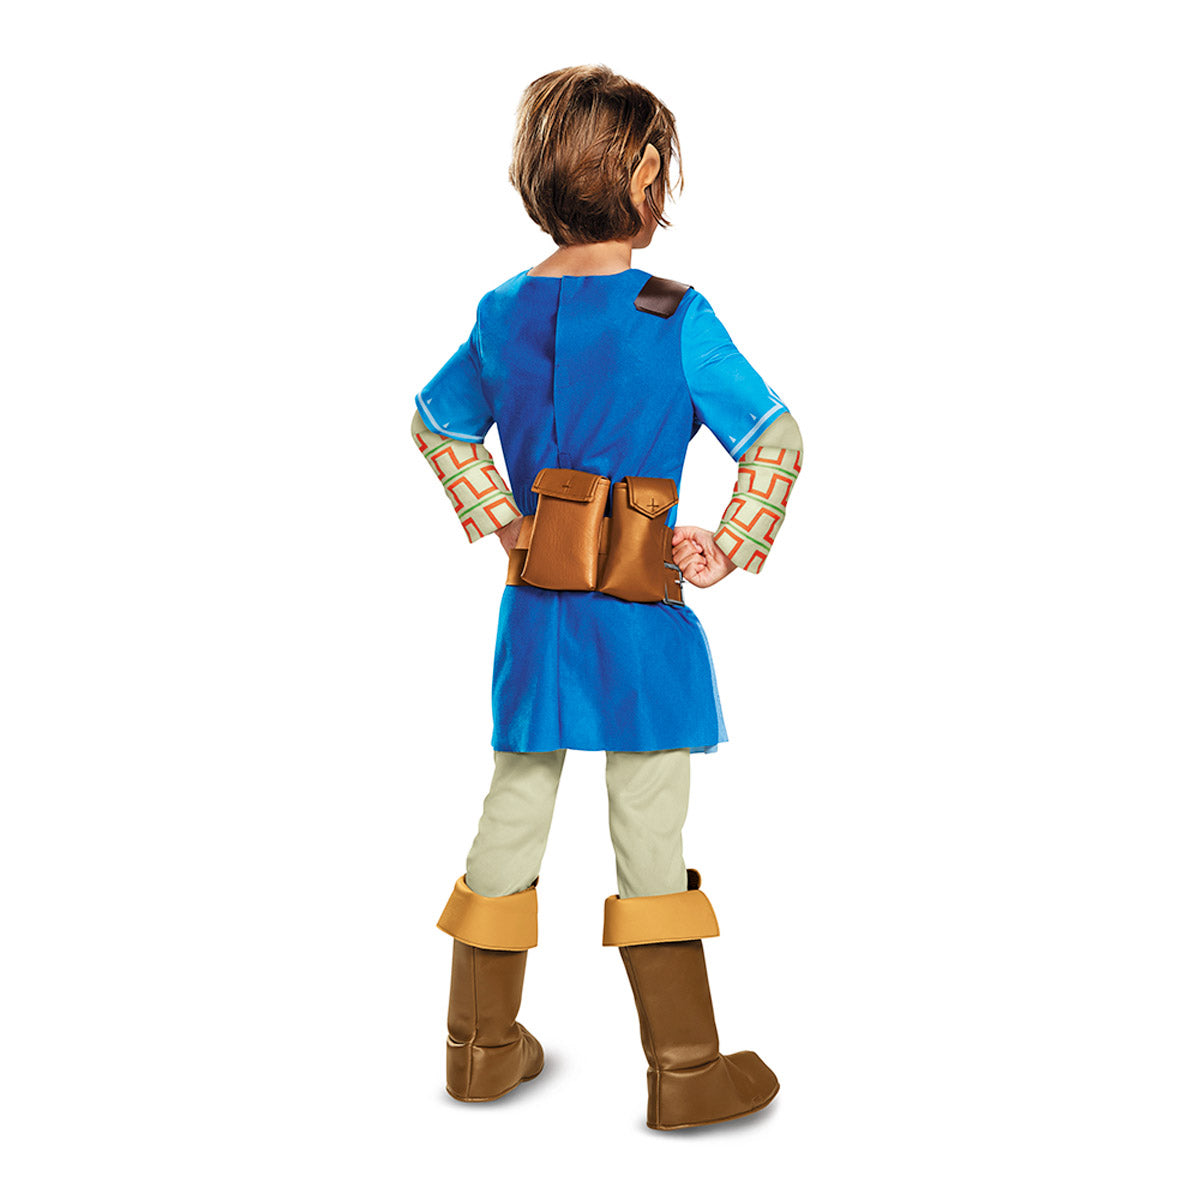 Link Breath Of The Wild Deluxe Disguise 22866